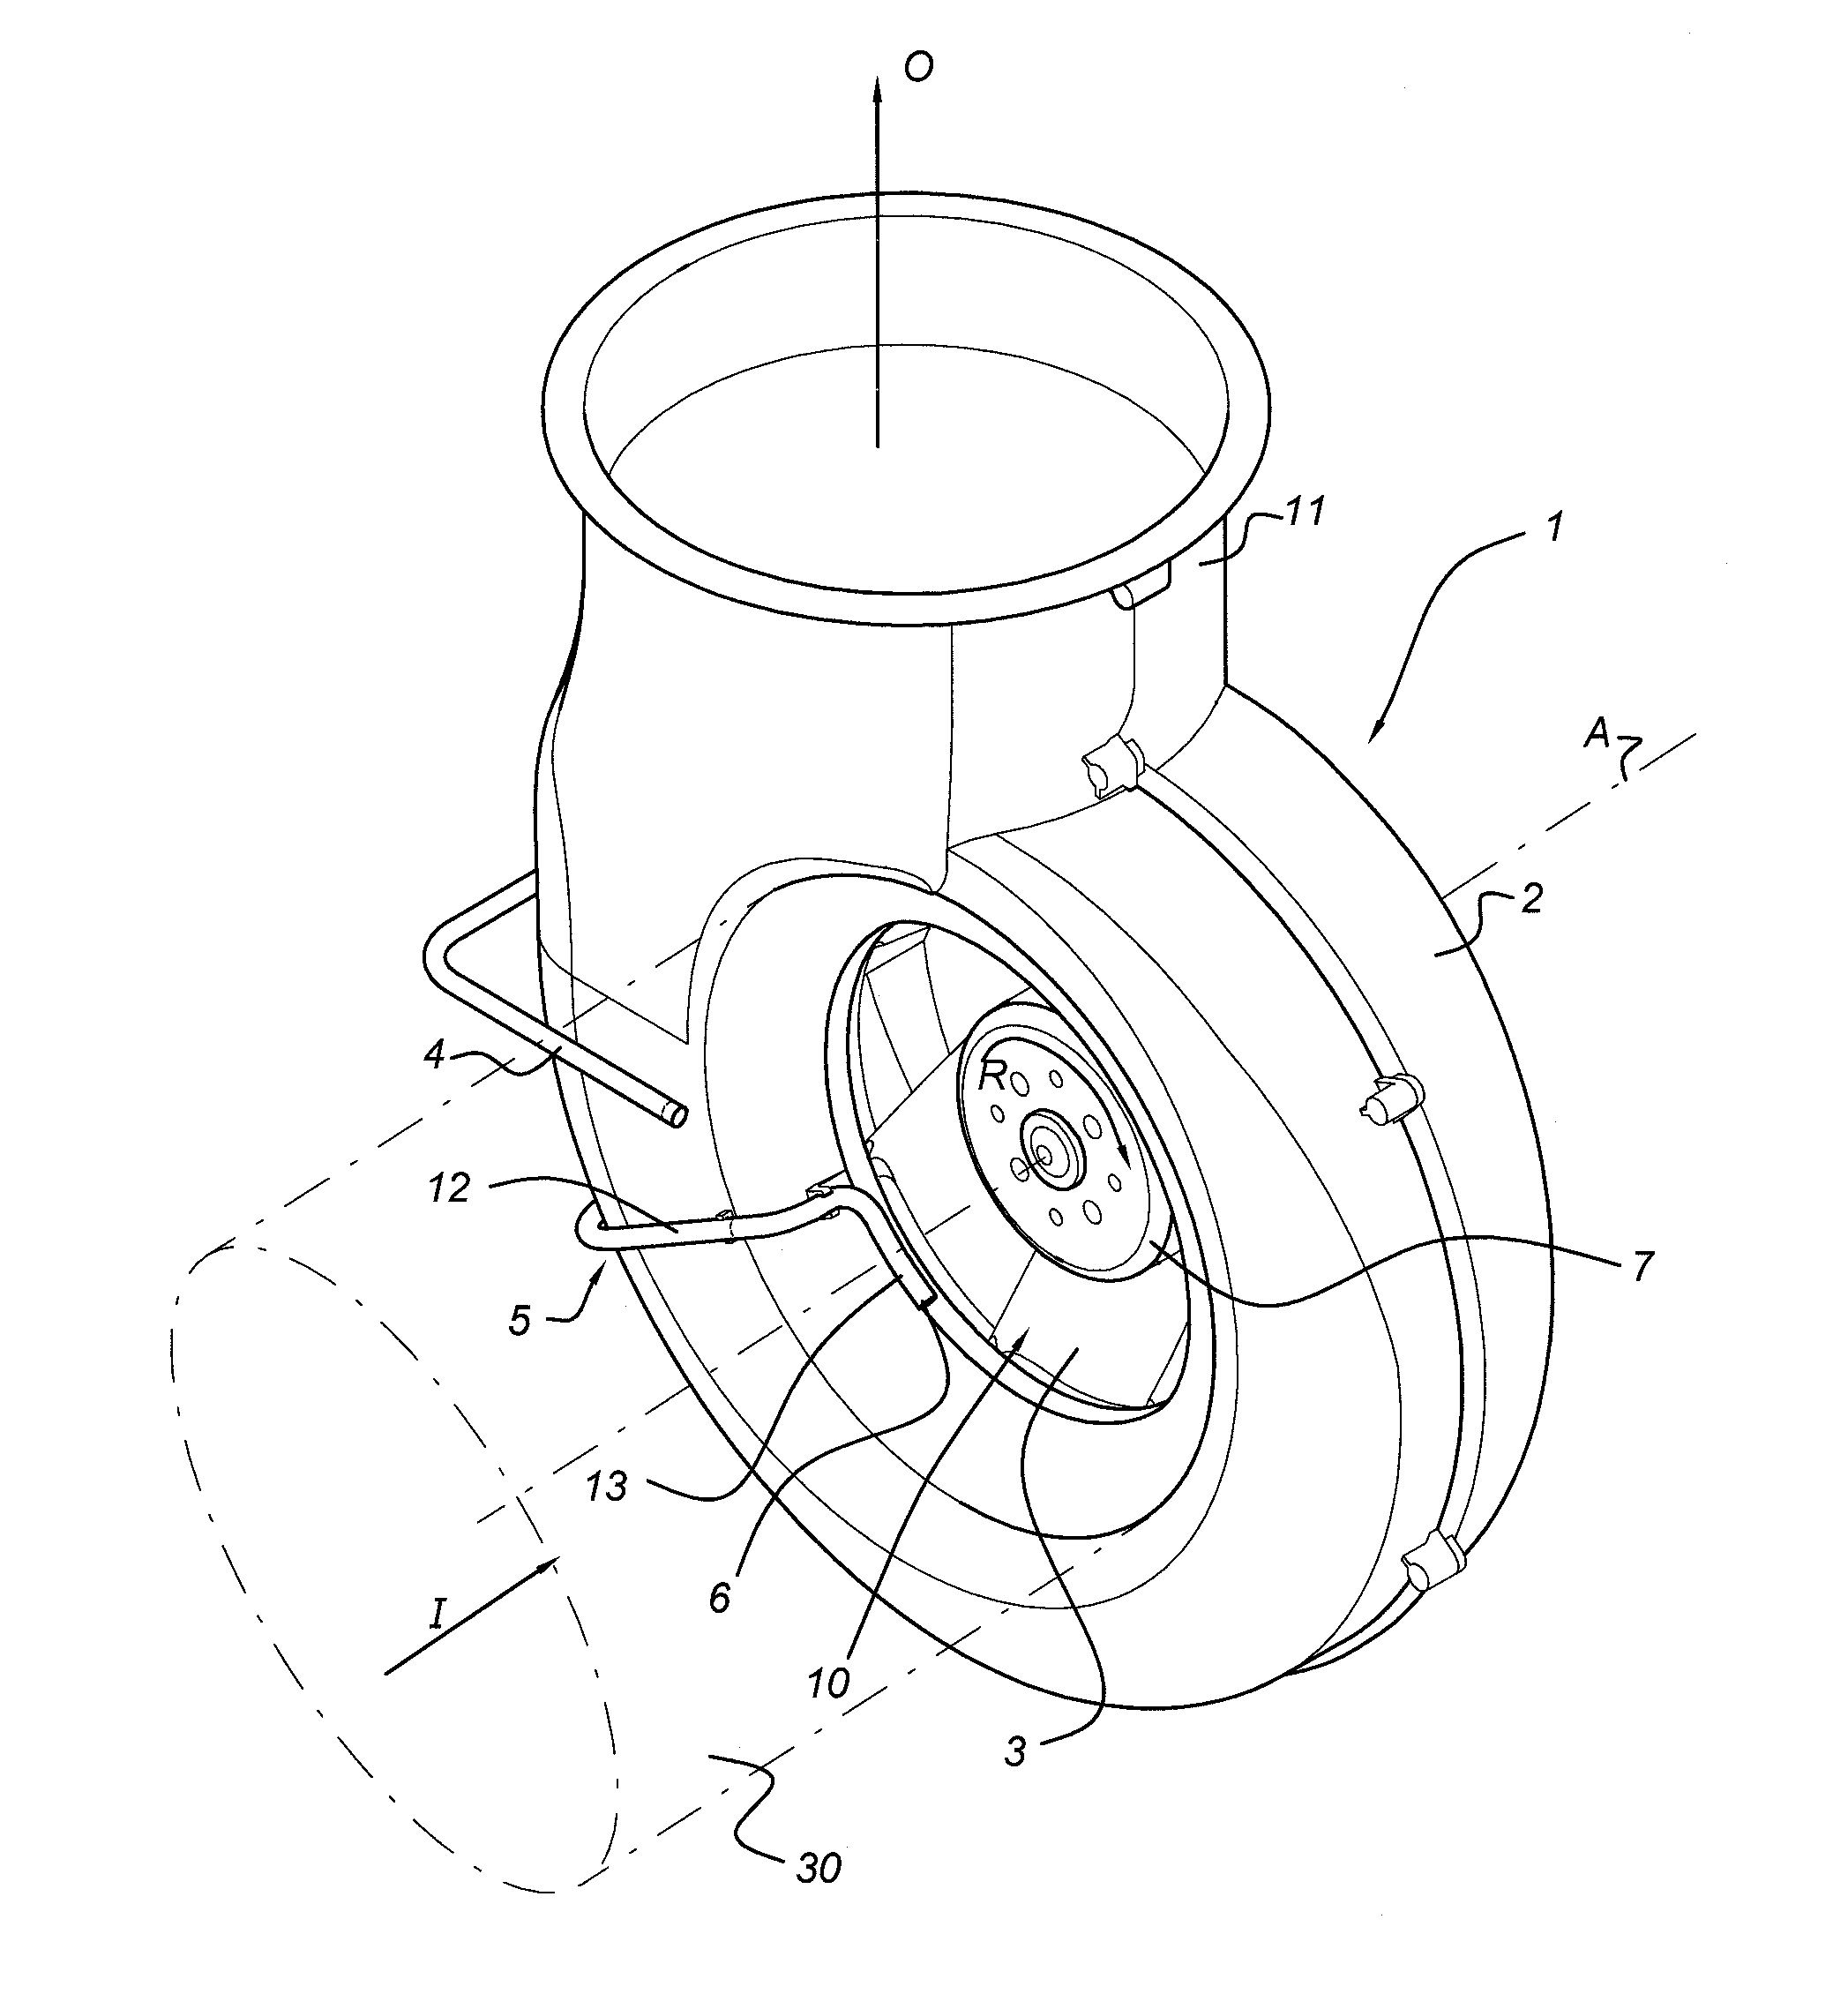 Air movement system